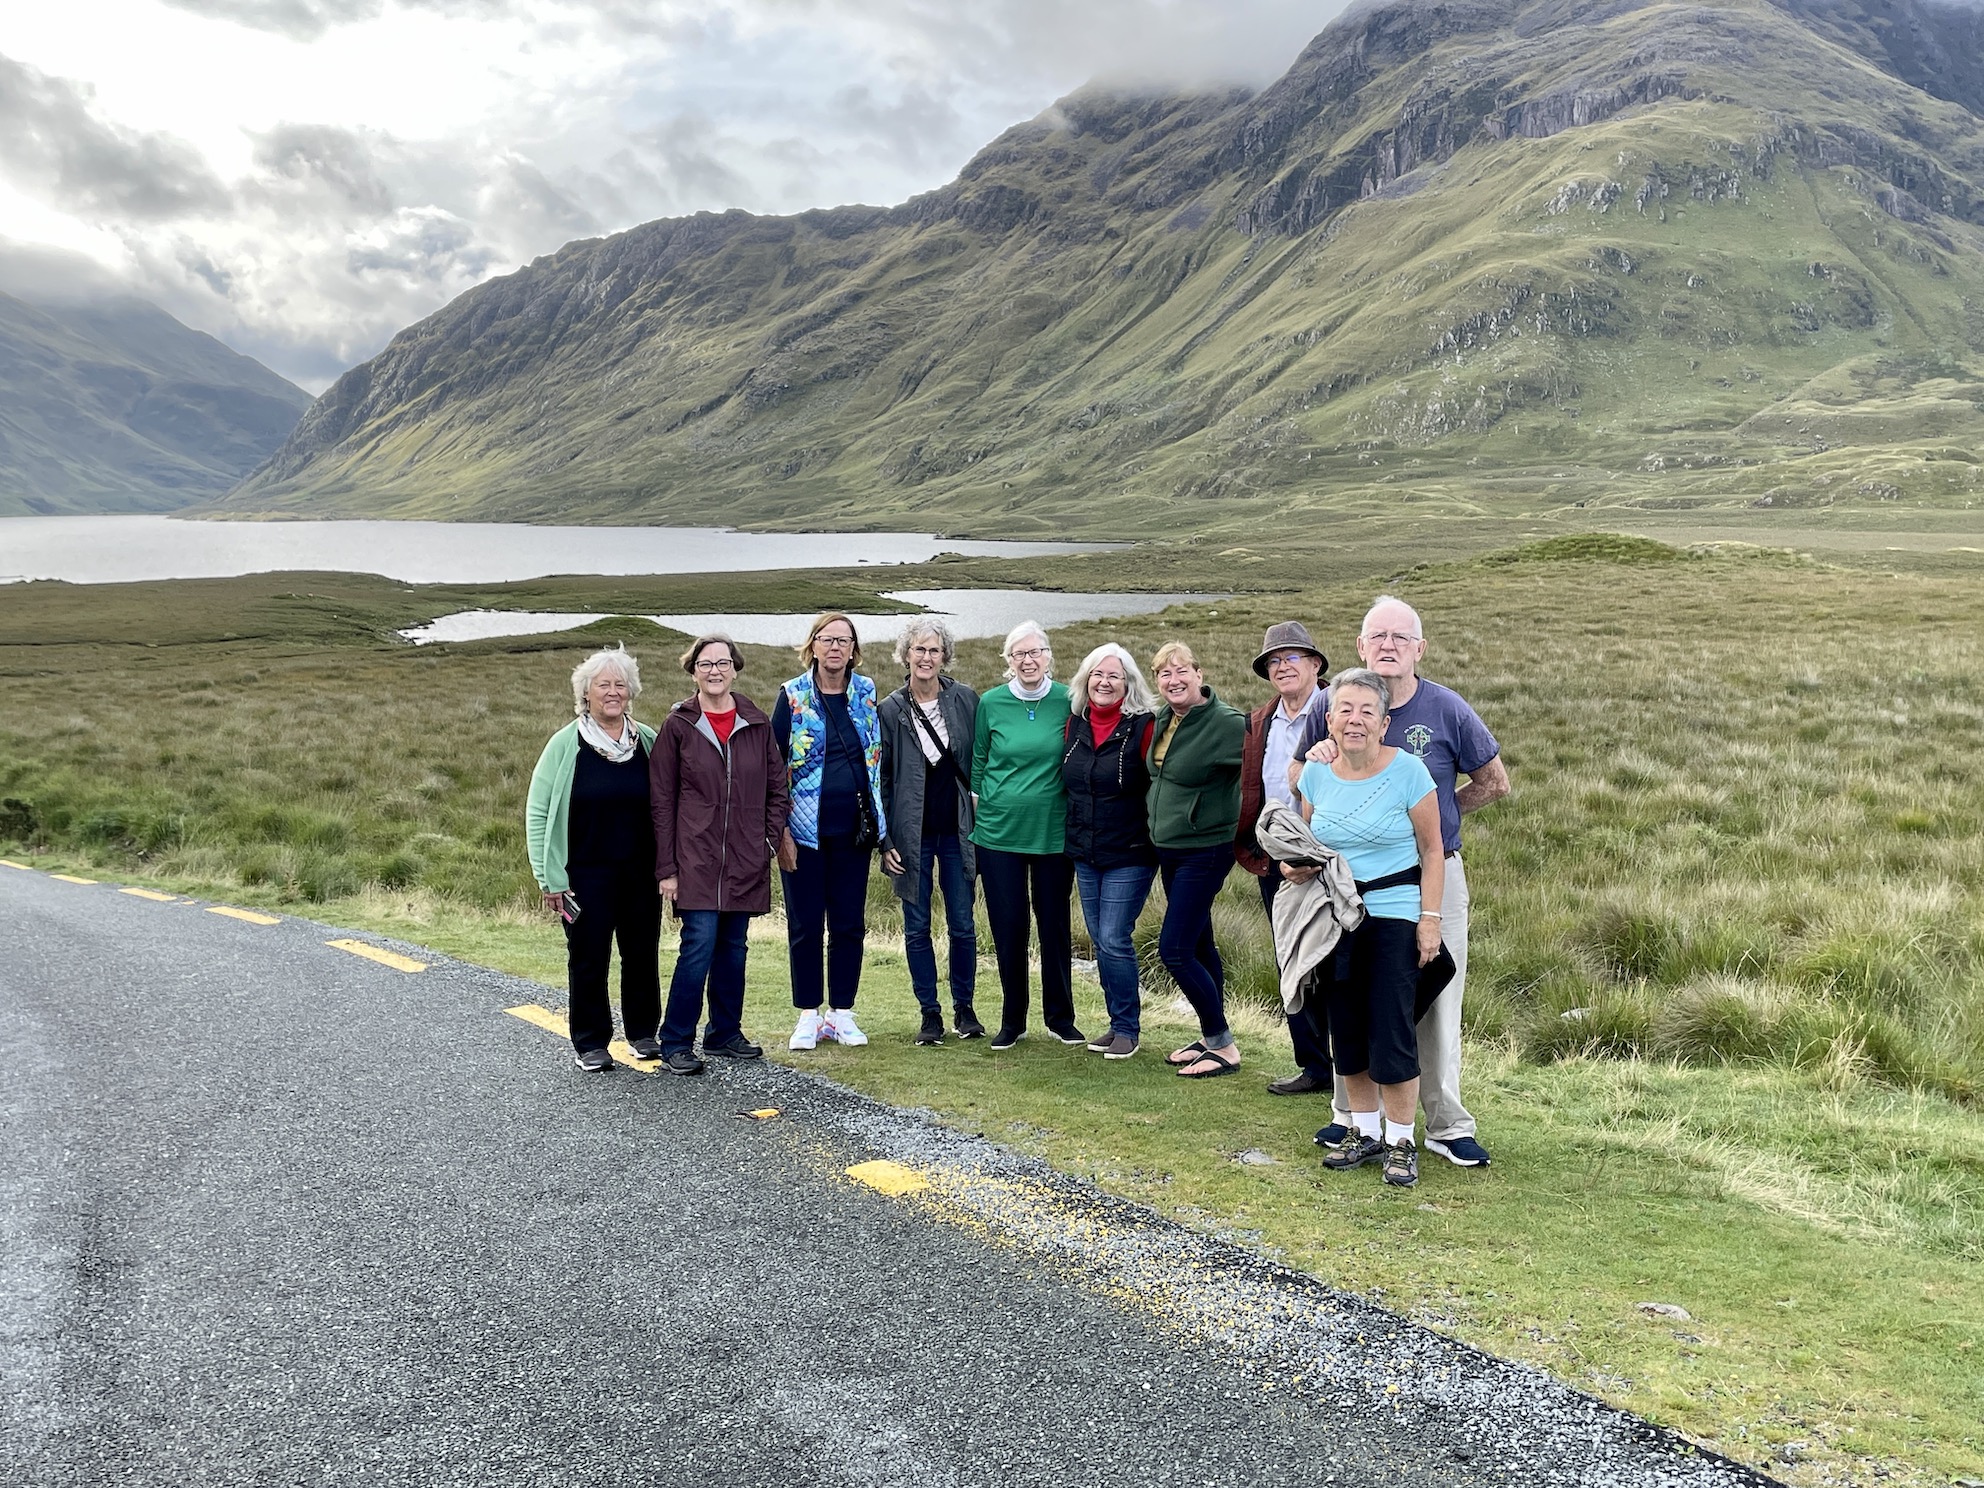 September 2021 Classic Tour Group, Doolough, County Mayo